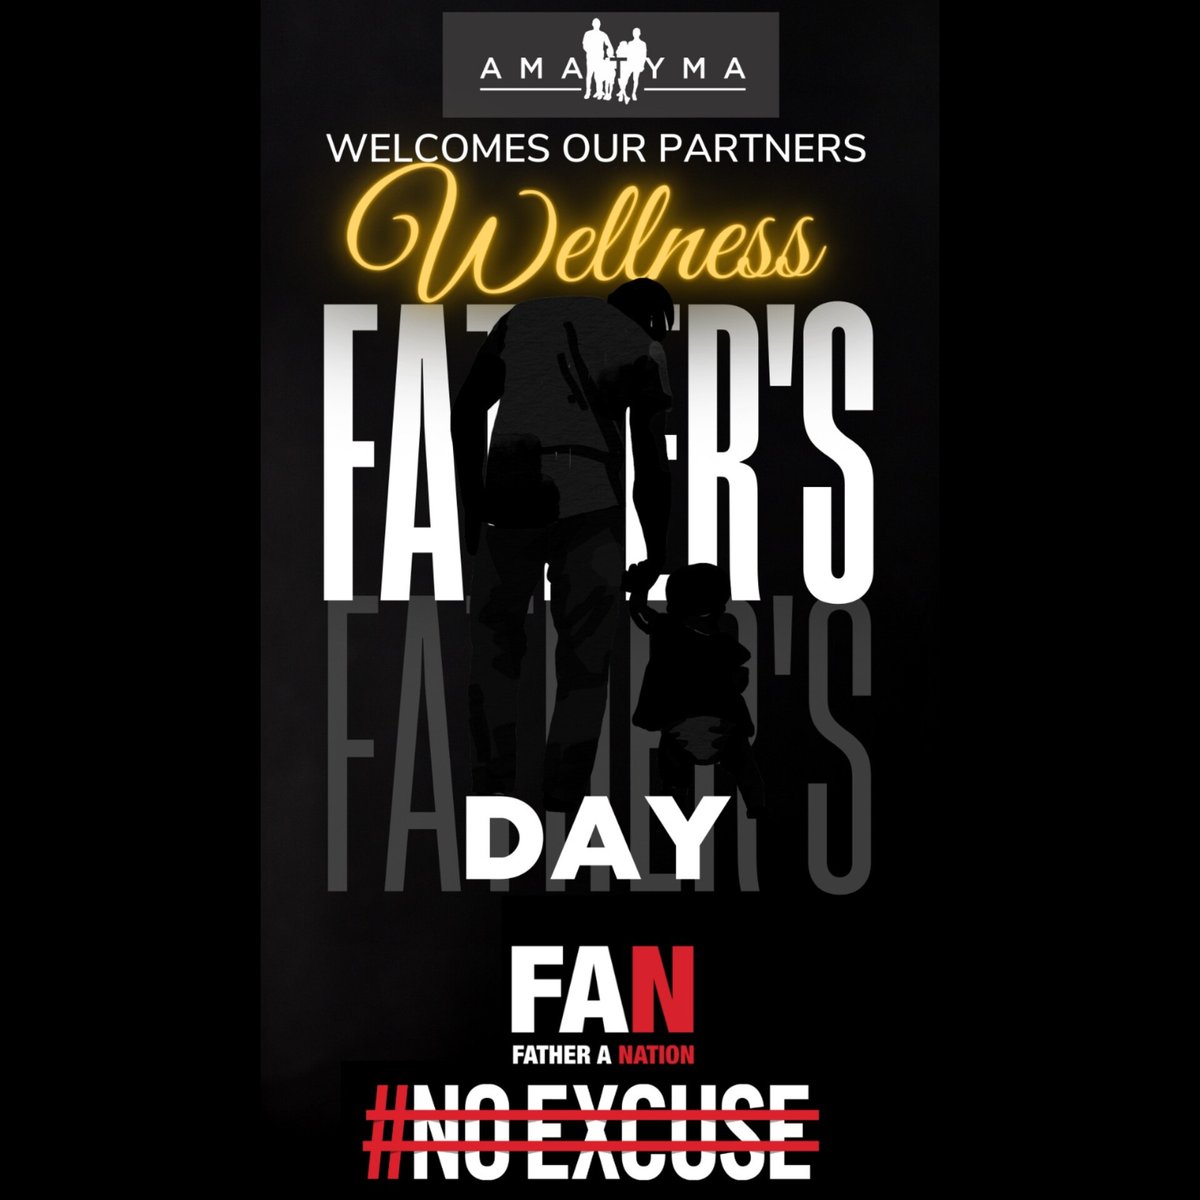 We welcome and appreciate our @amatyma_sa all black  wellness father's day event partner @carlingblacklabel #NoExcuse @fatheranation for believing in the wellness of men🖤🖤 #AMATYMA